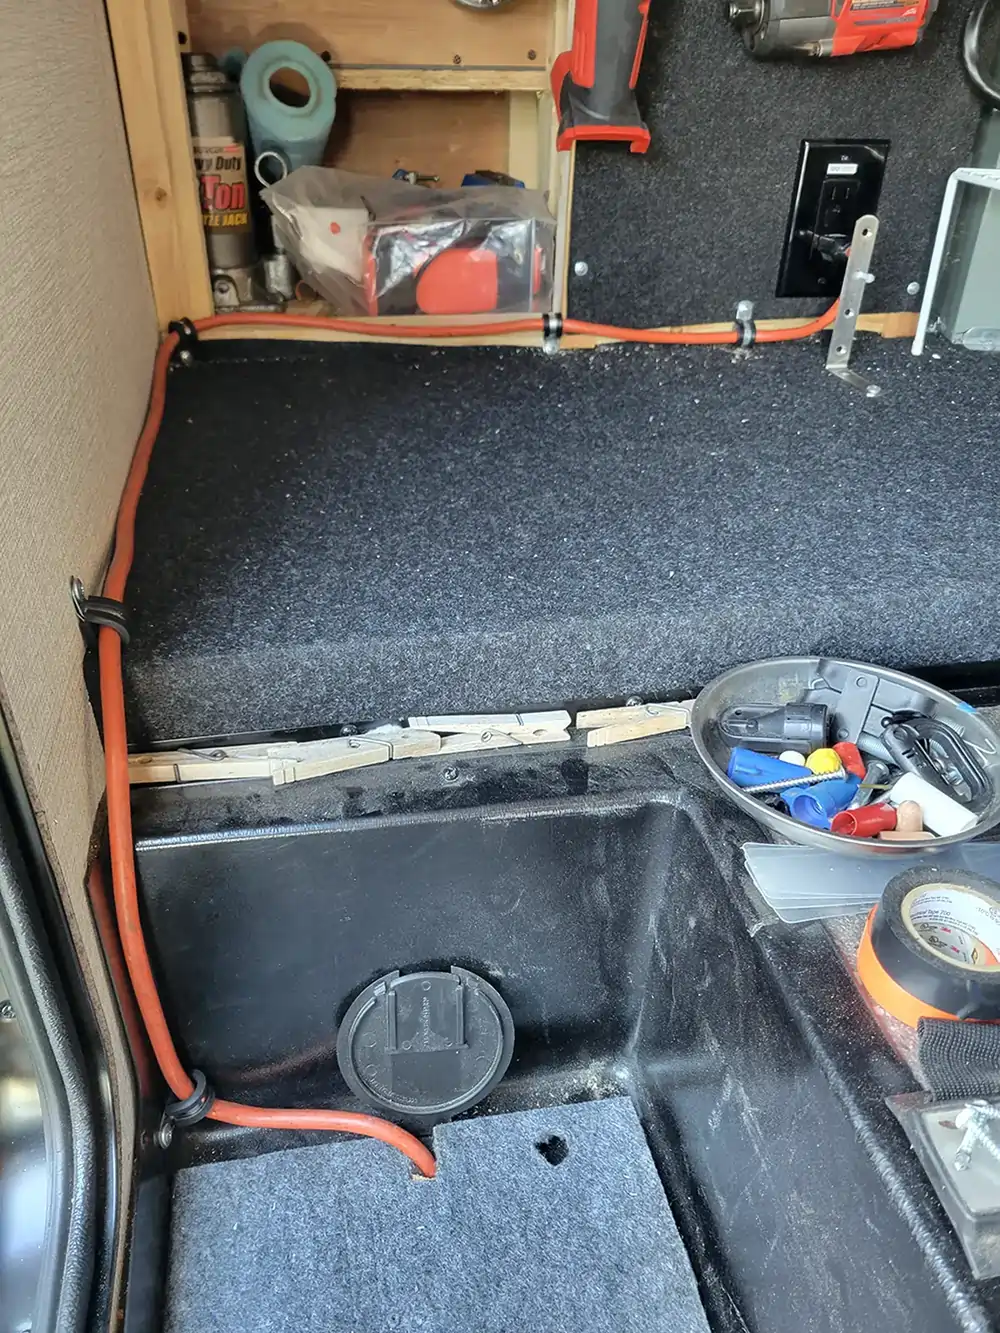 view inside the pass-through compartment of the RV, made empty for installation and showing the cable routed through the hatch and clamped to walls as it leads to the receptacle provided by the manufacturer